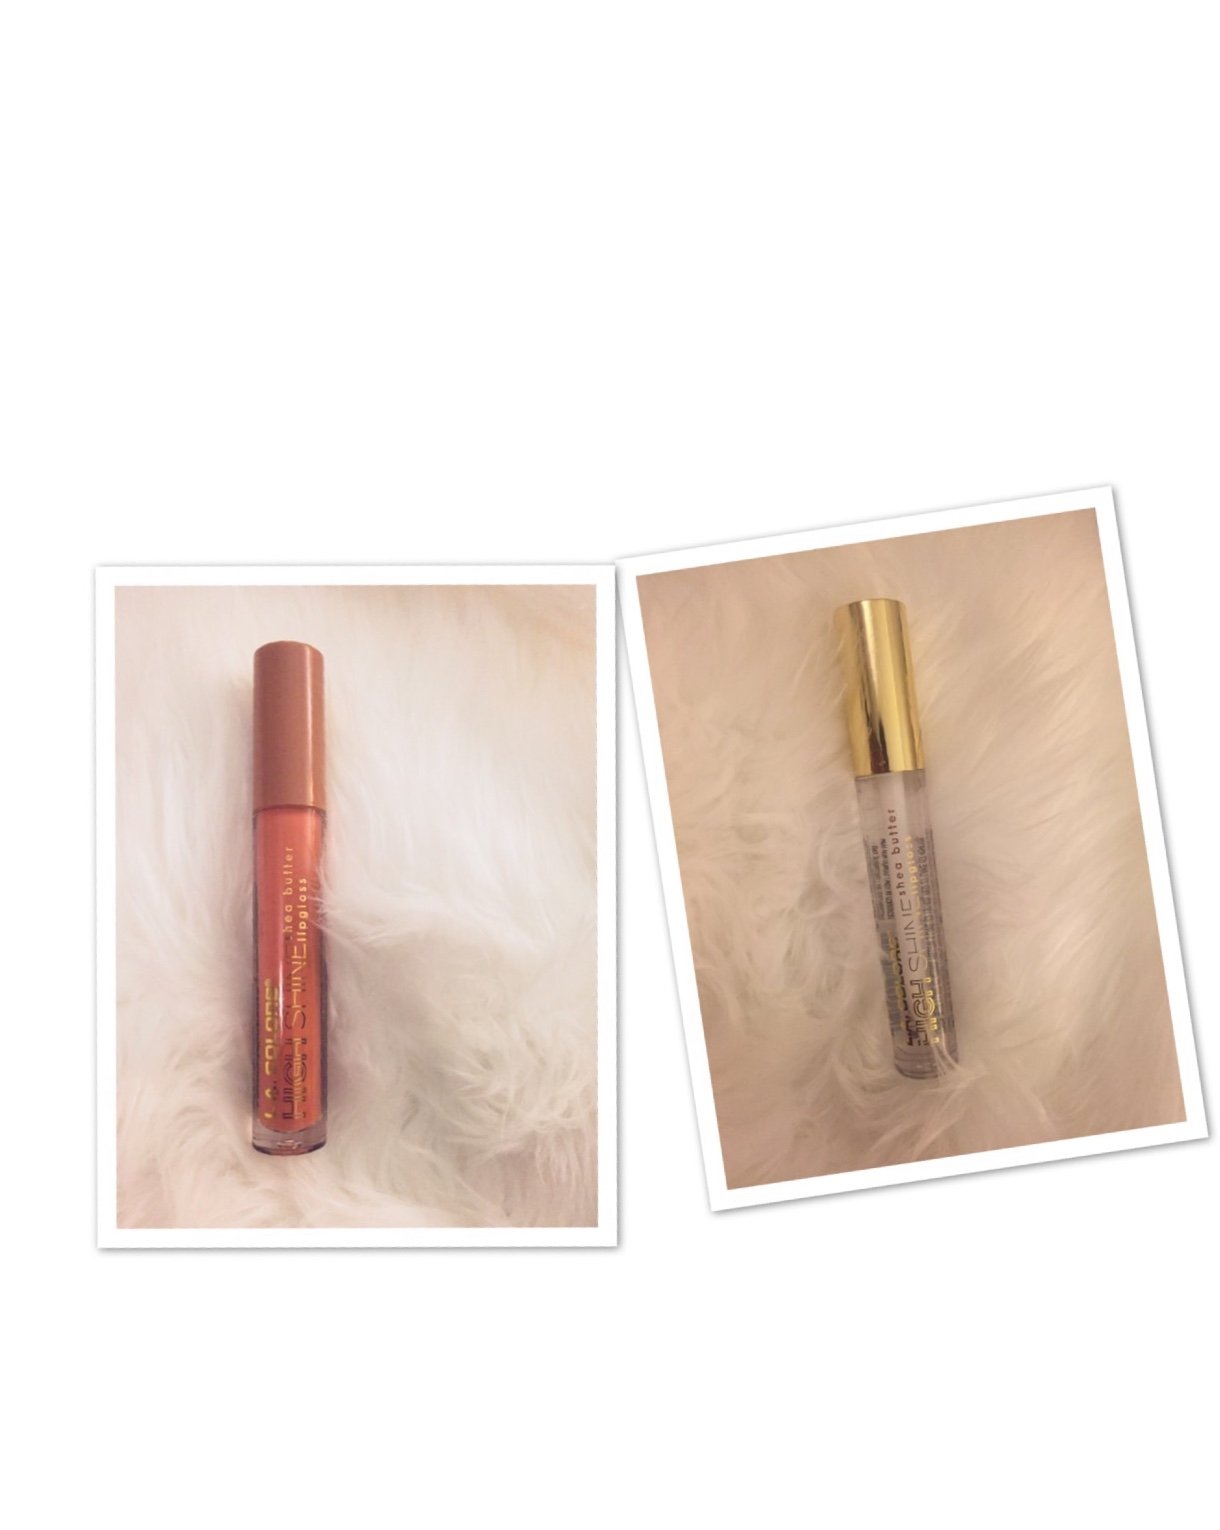 Image of La Colors High shine clear and Sensual lip gloss/shea butter 2ct